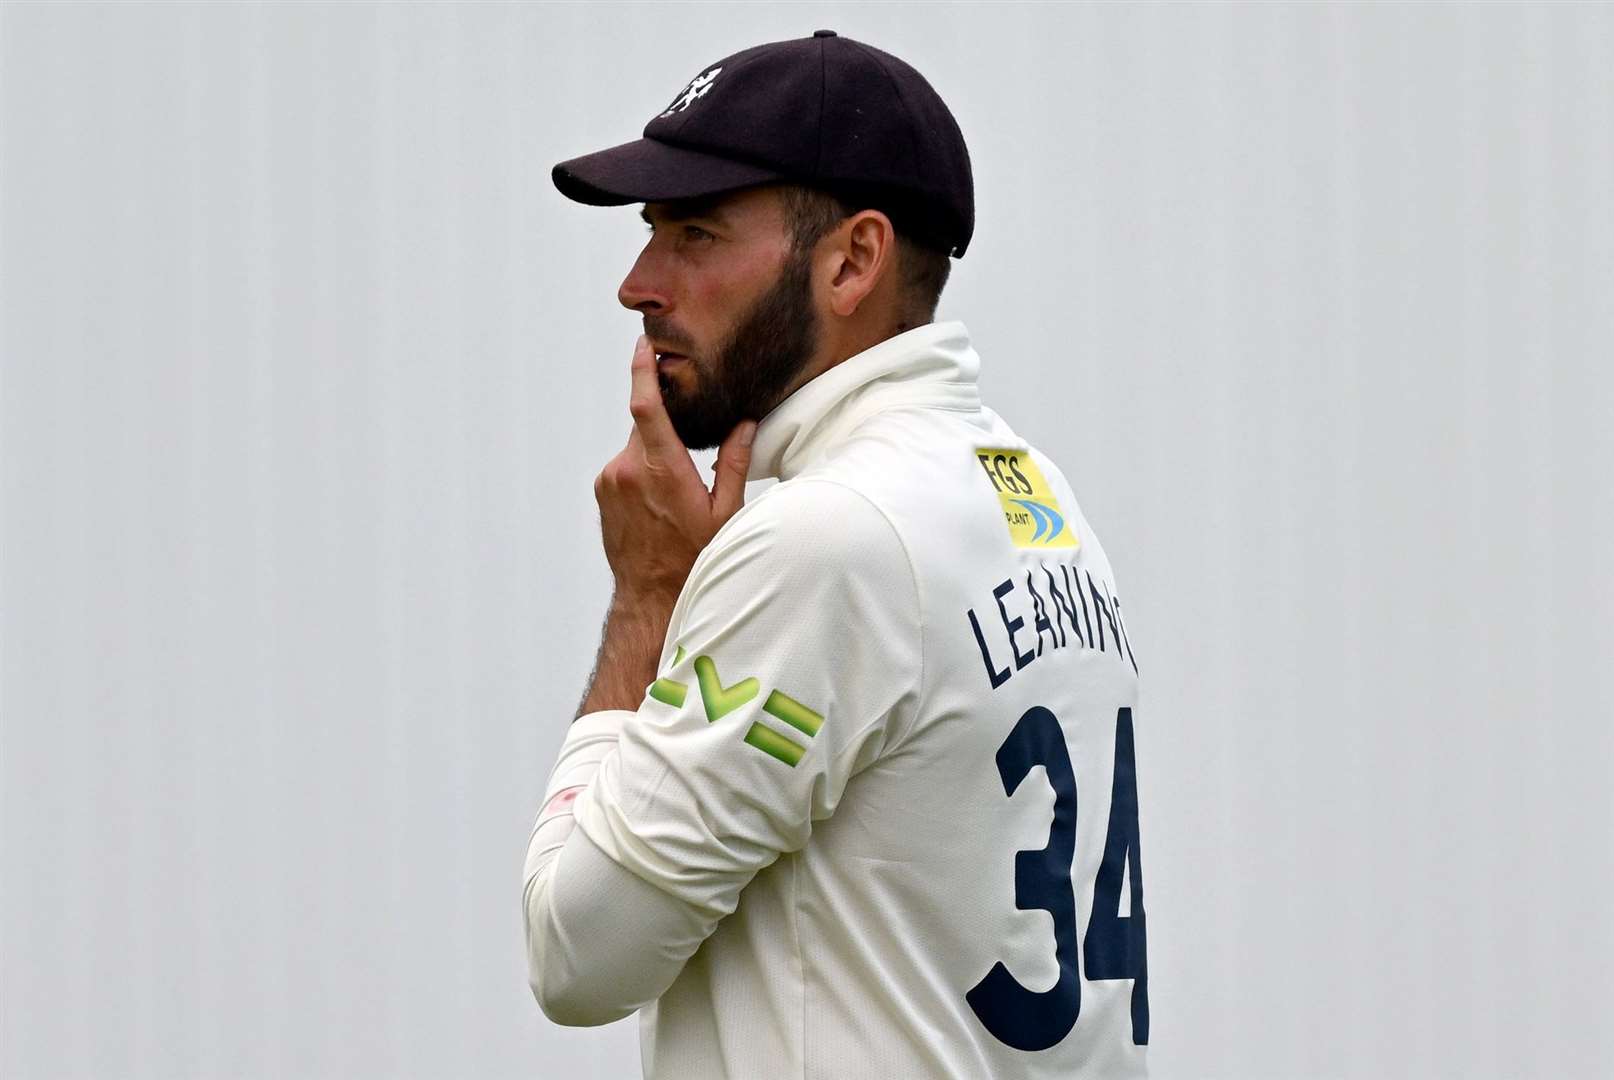 Stand-in captain Jack Leaning – praised Surrey after their record-breaking chase against Kent on day four. Picture: Keith Gillard